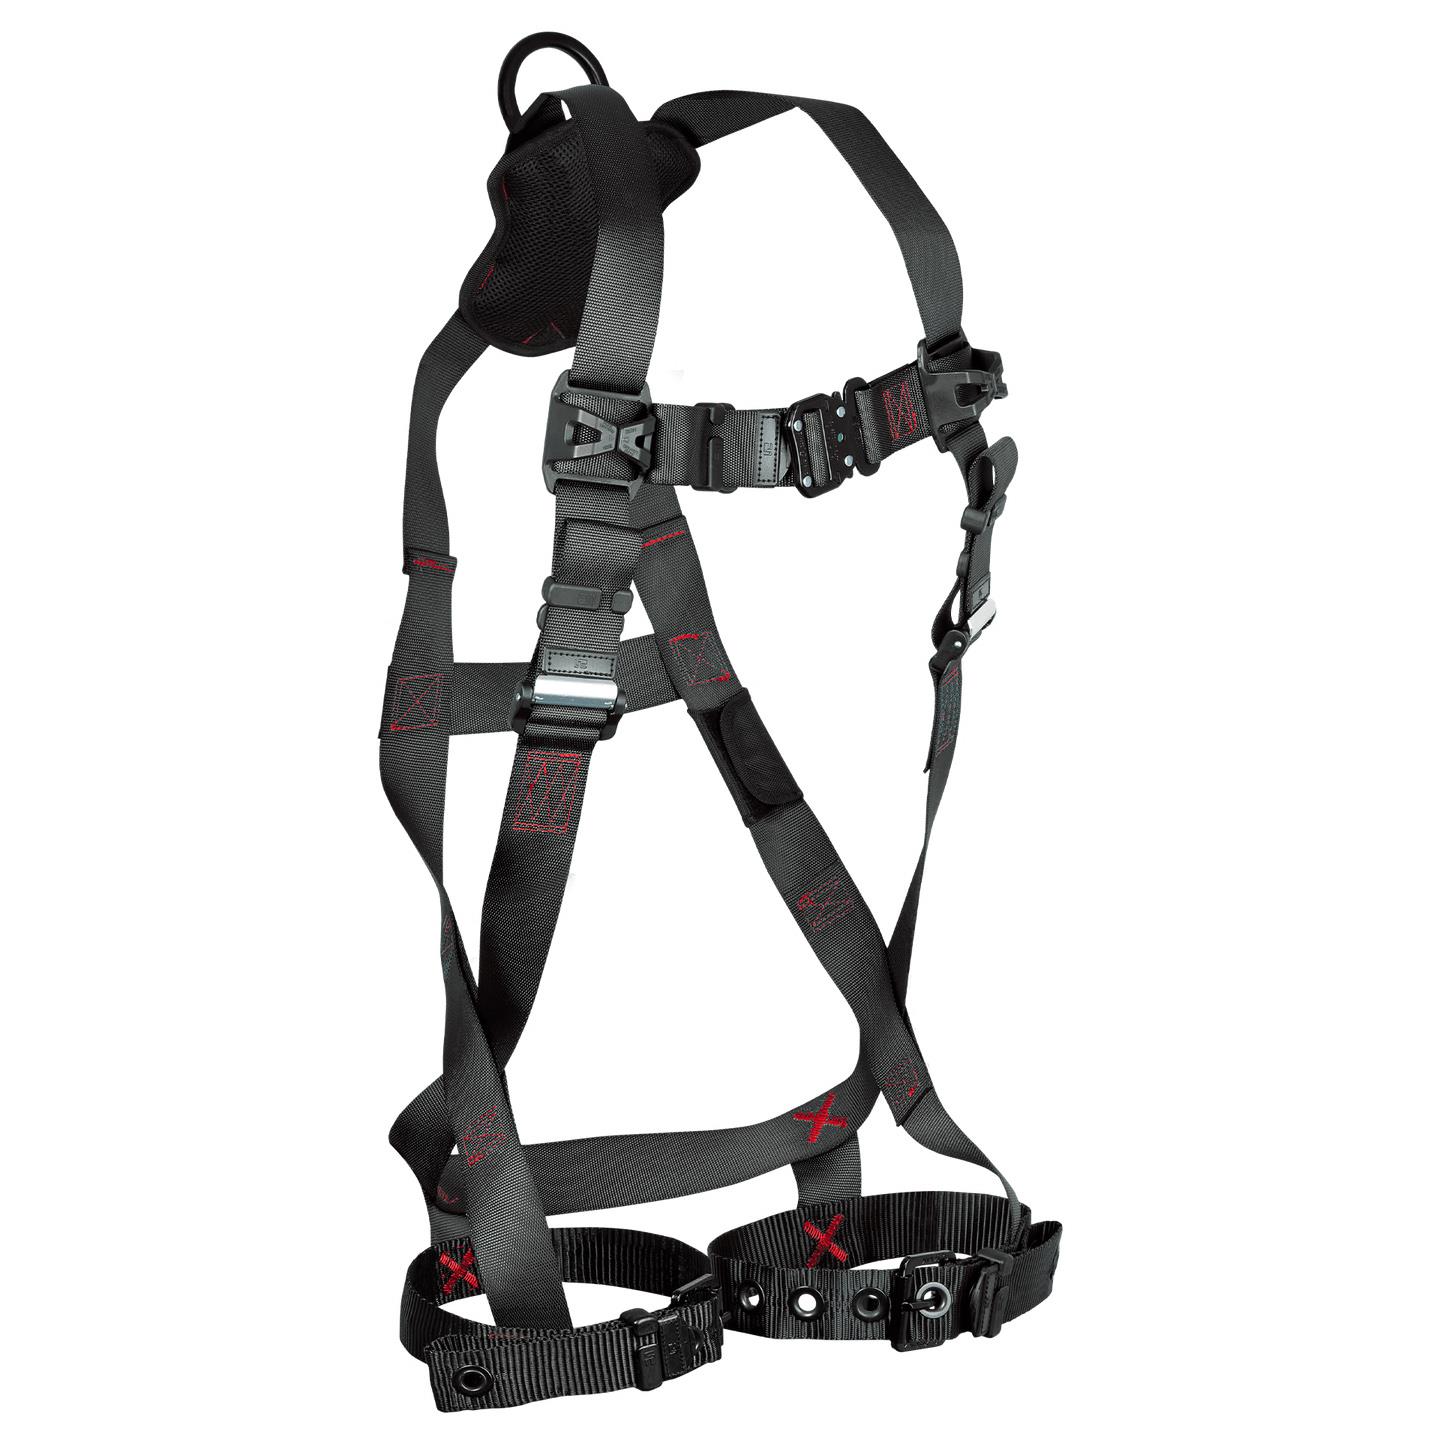 FT-Iron 1D Standard Non-Belted Full Body Harness, Tongue Buckle Leg Adjustment